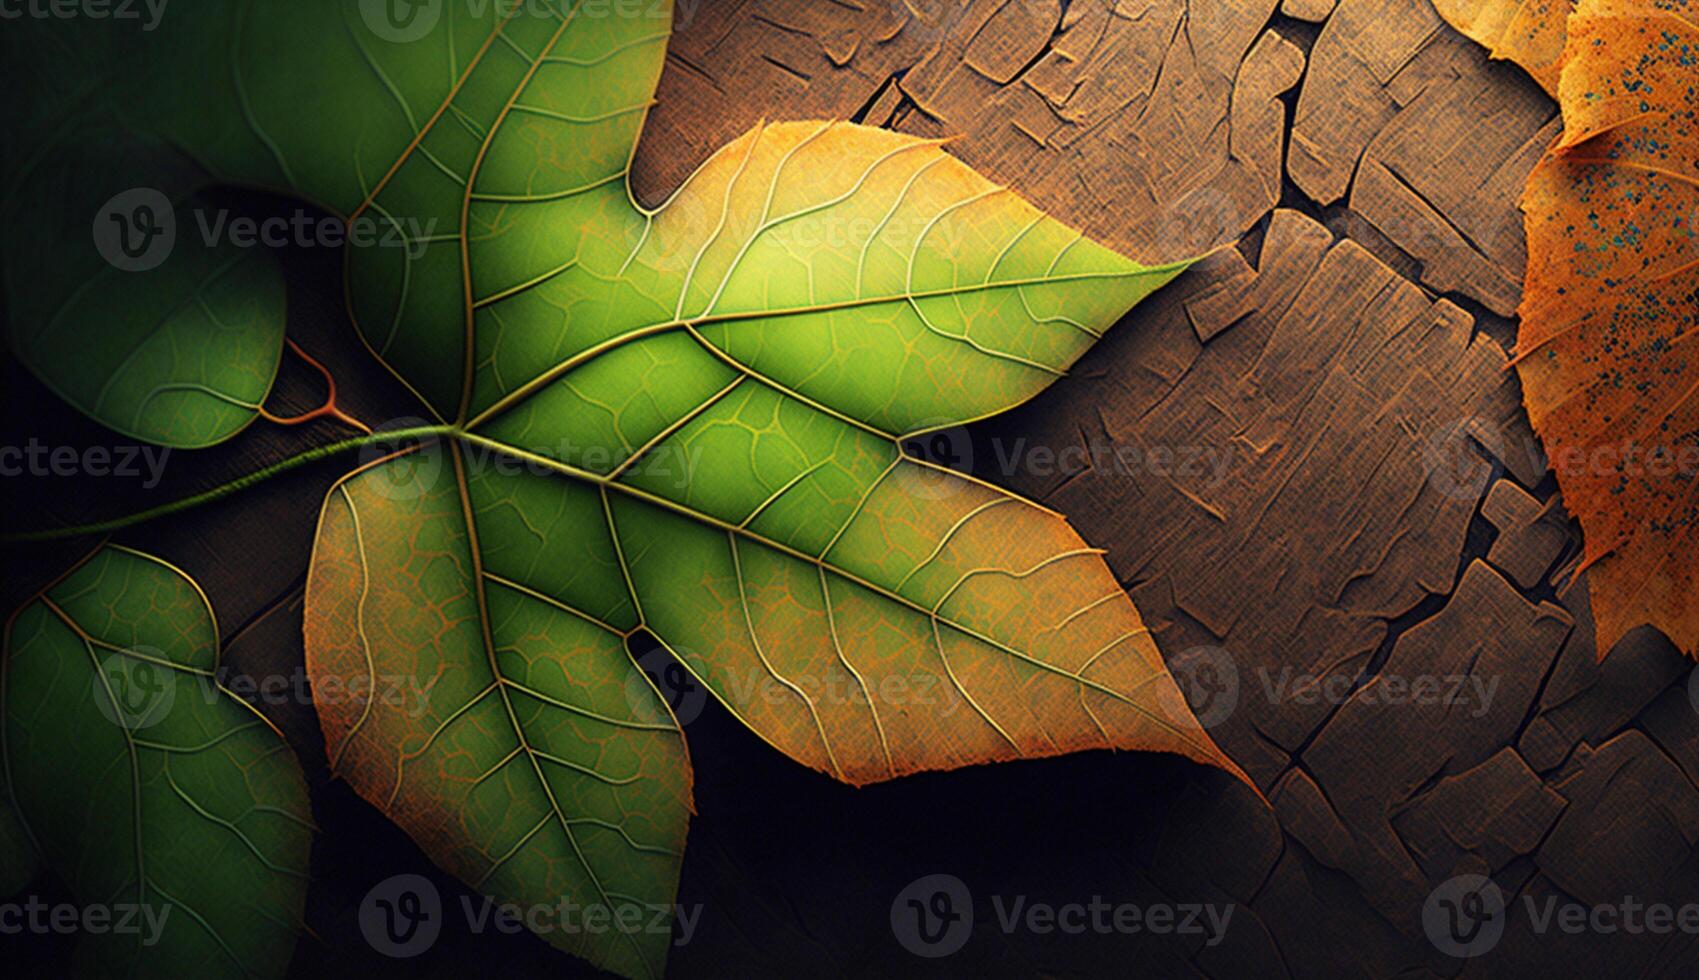 Artful Textures from the Beauty of Leaves photo